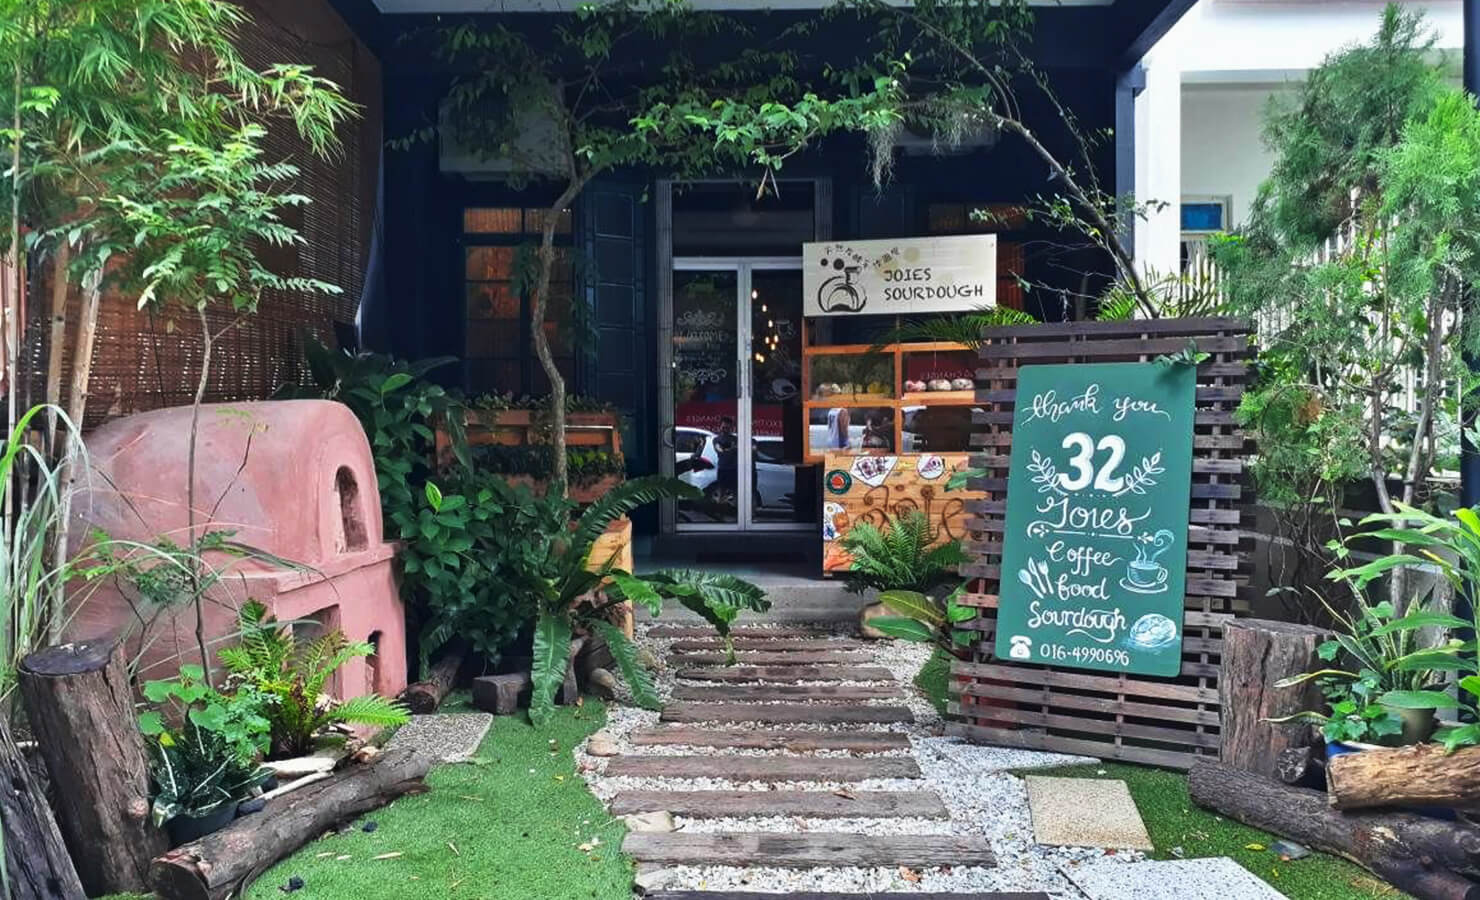 bloomthis-hidden-gems-in-malaysia-03-joies-cafe-penang